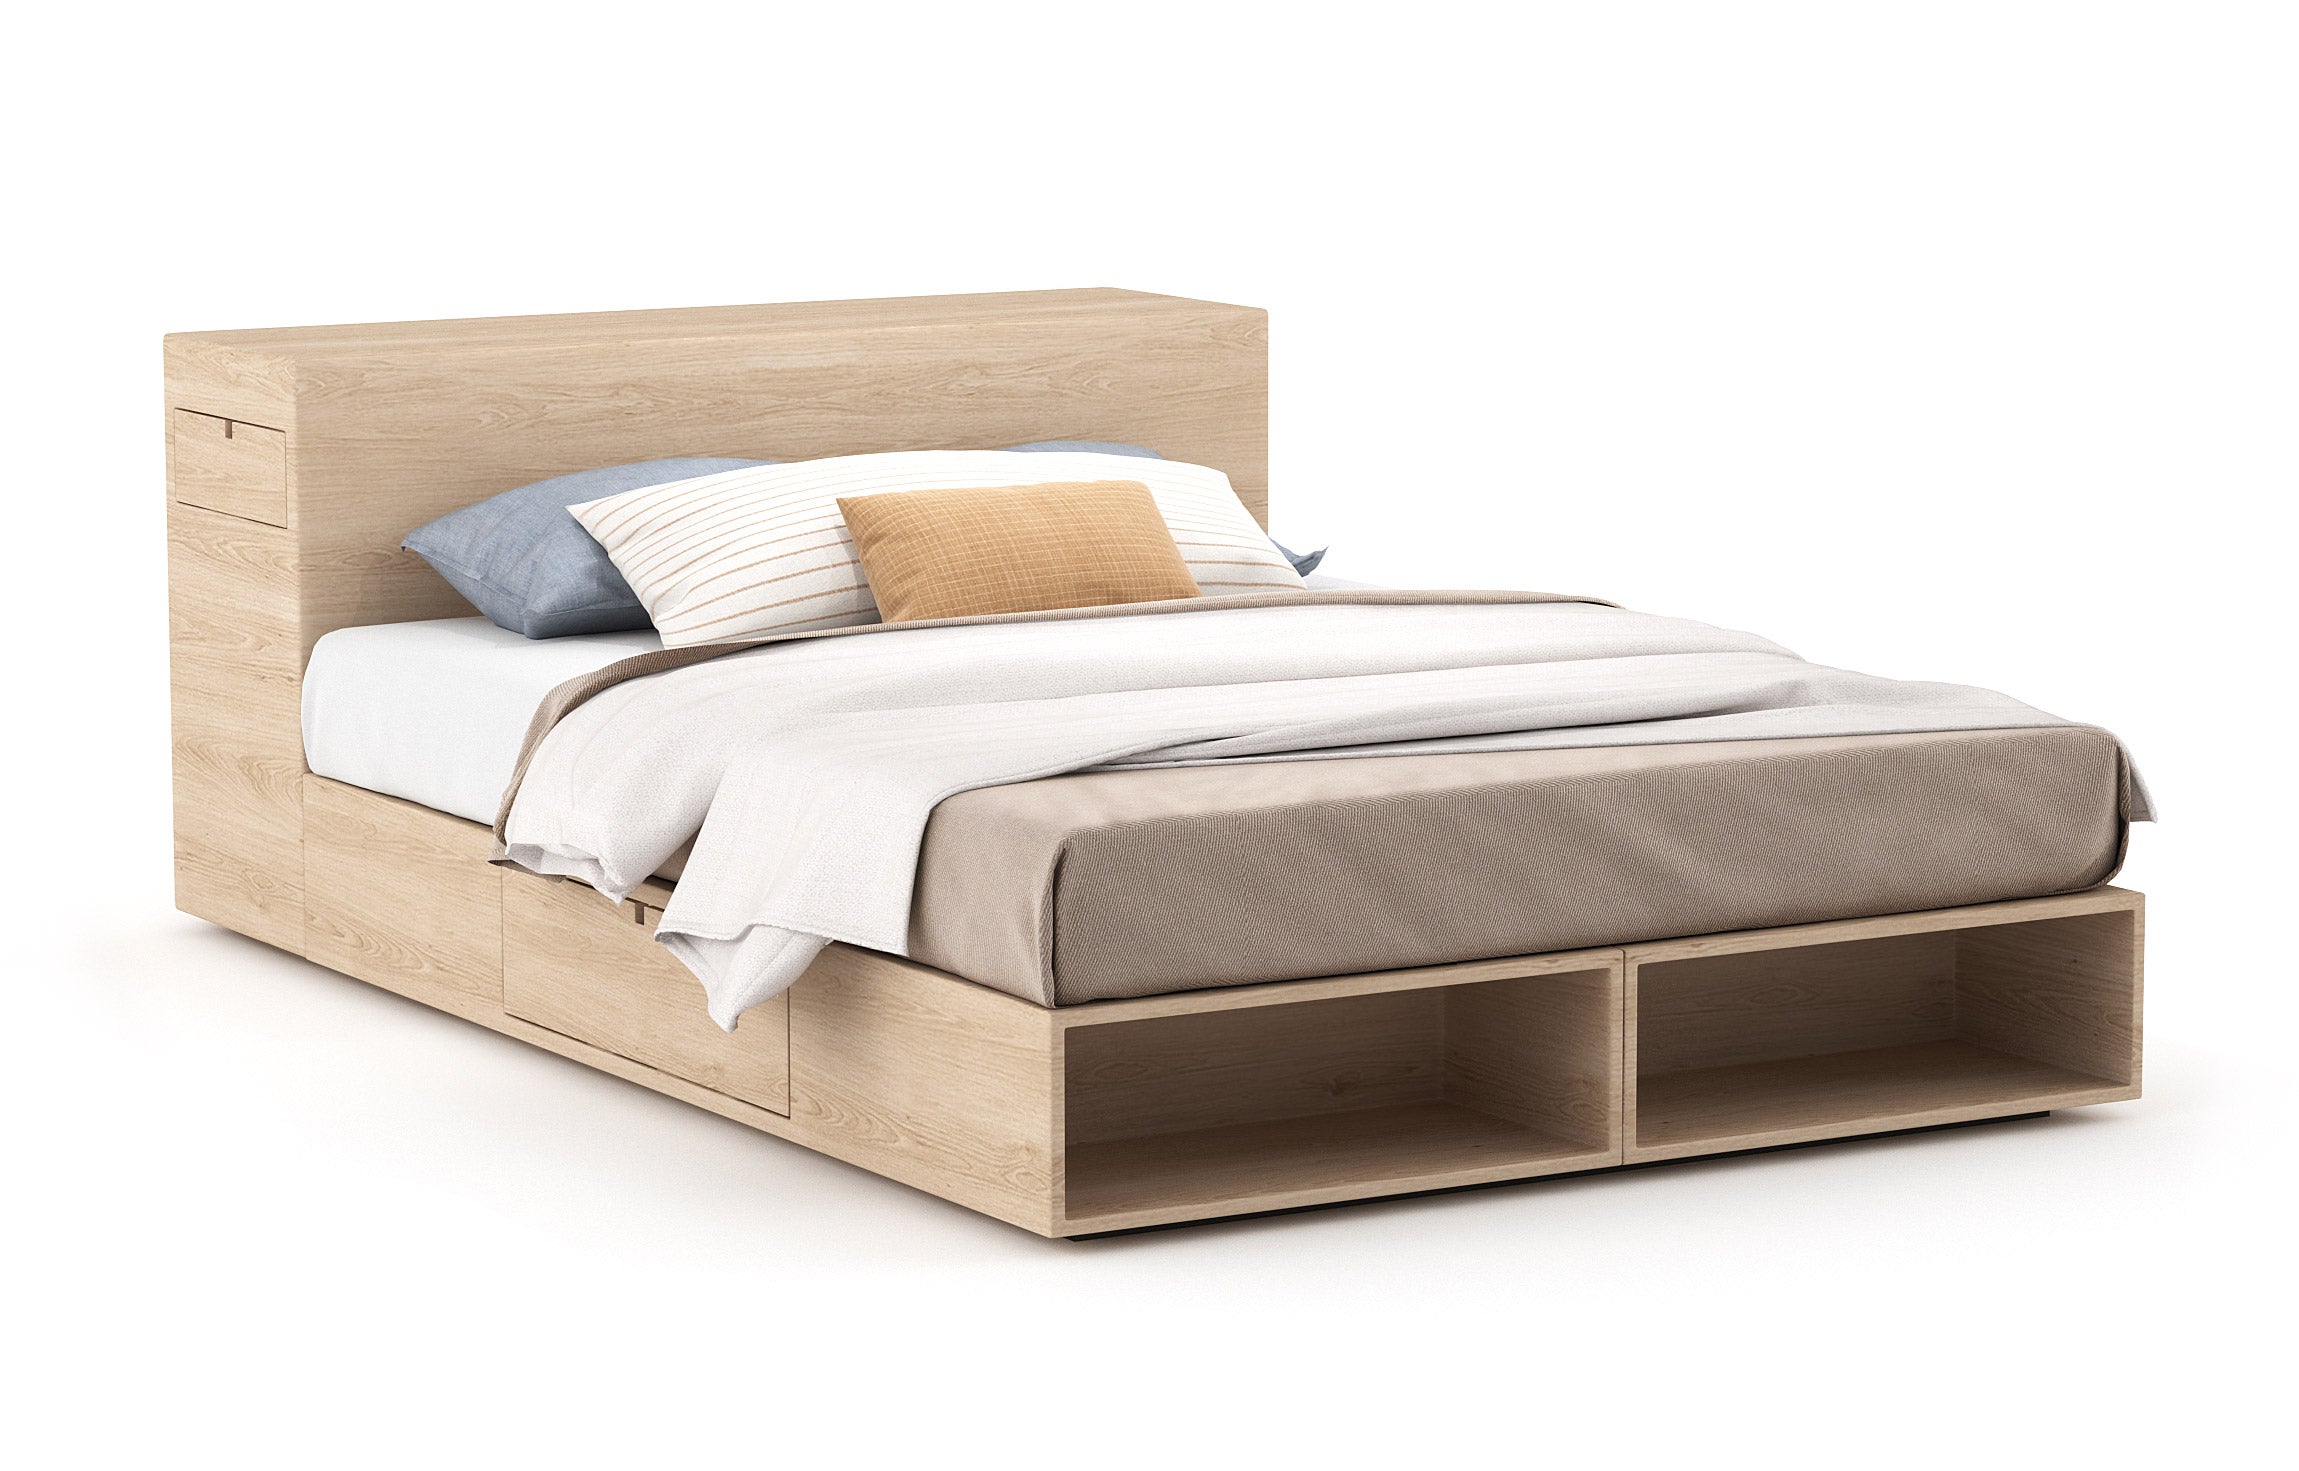 G: Buden Queen Bed in maple wood with high headboard